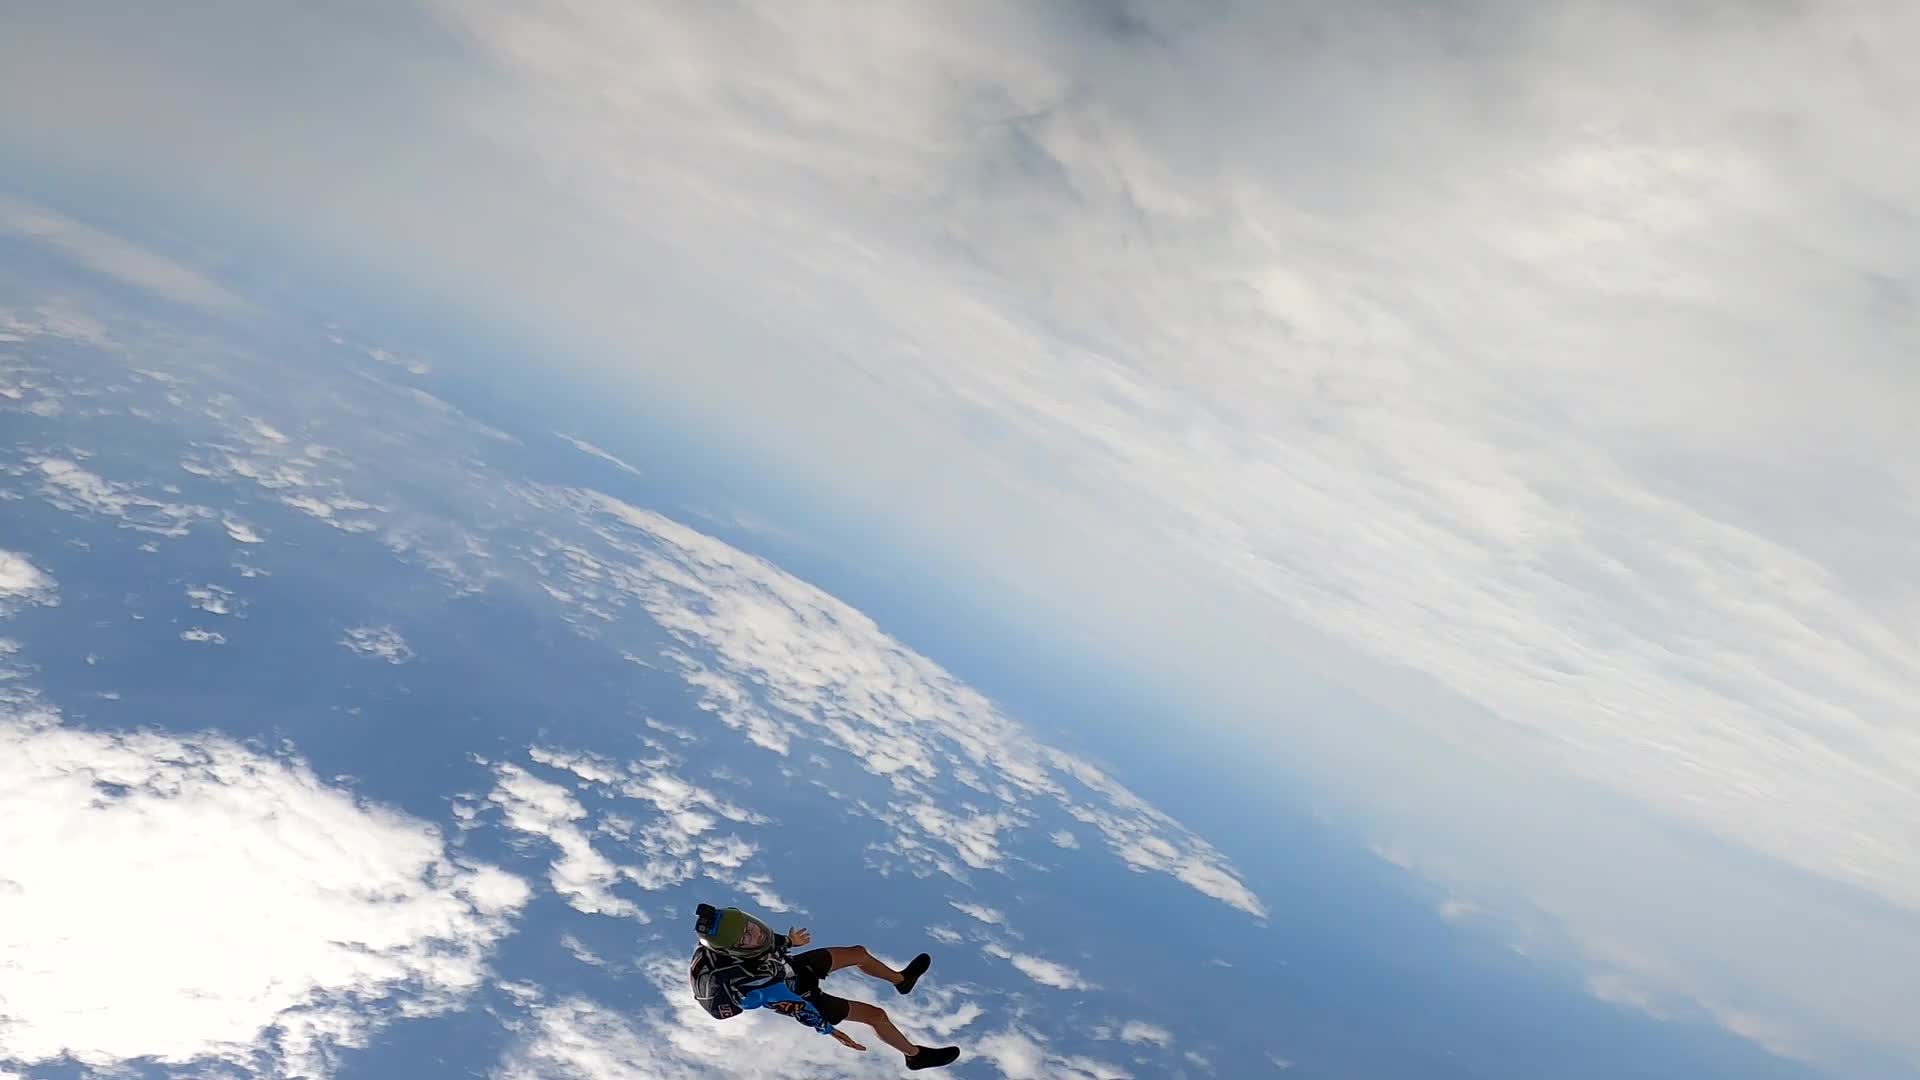 Person Enjoys Free Fall While Skydiving